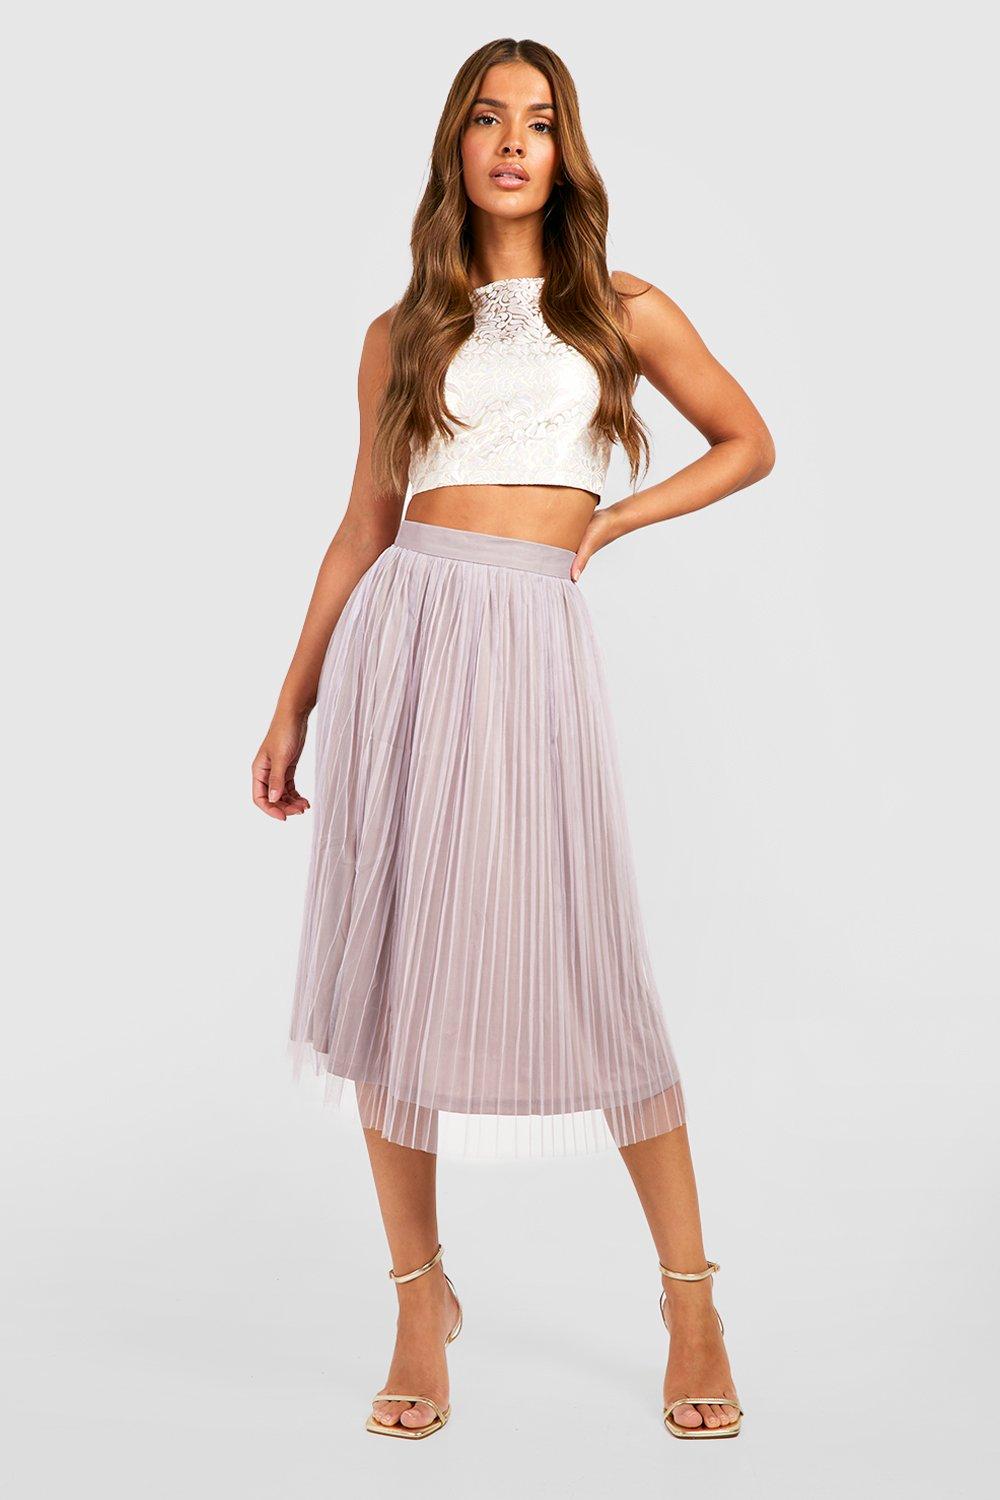 boohoo two piece skirt and top